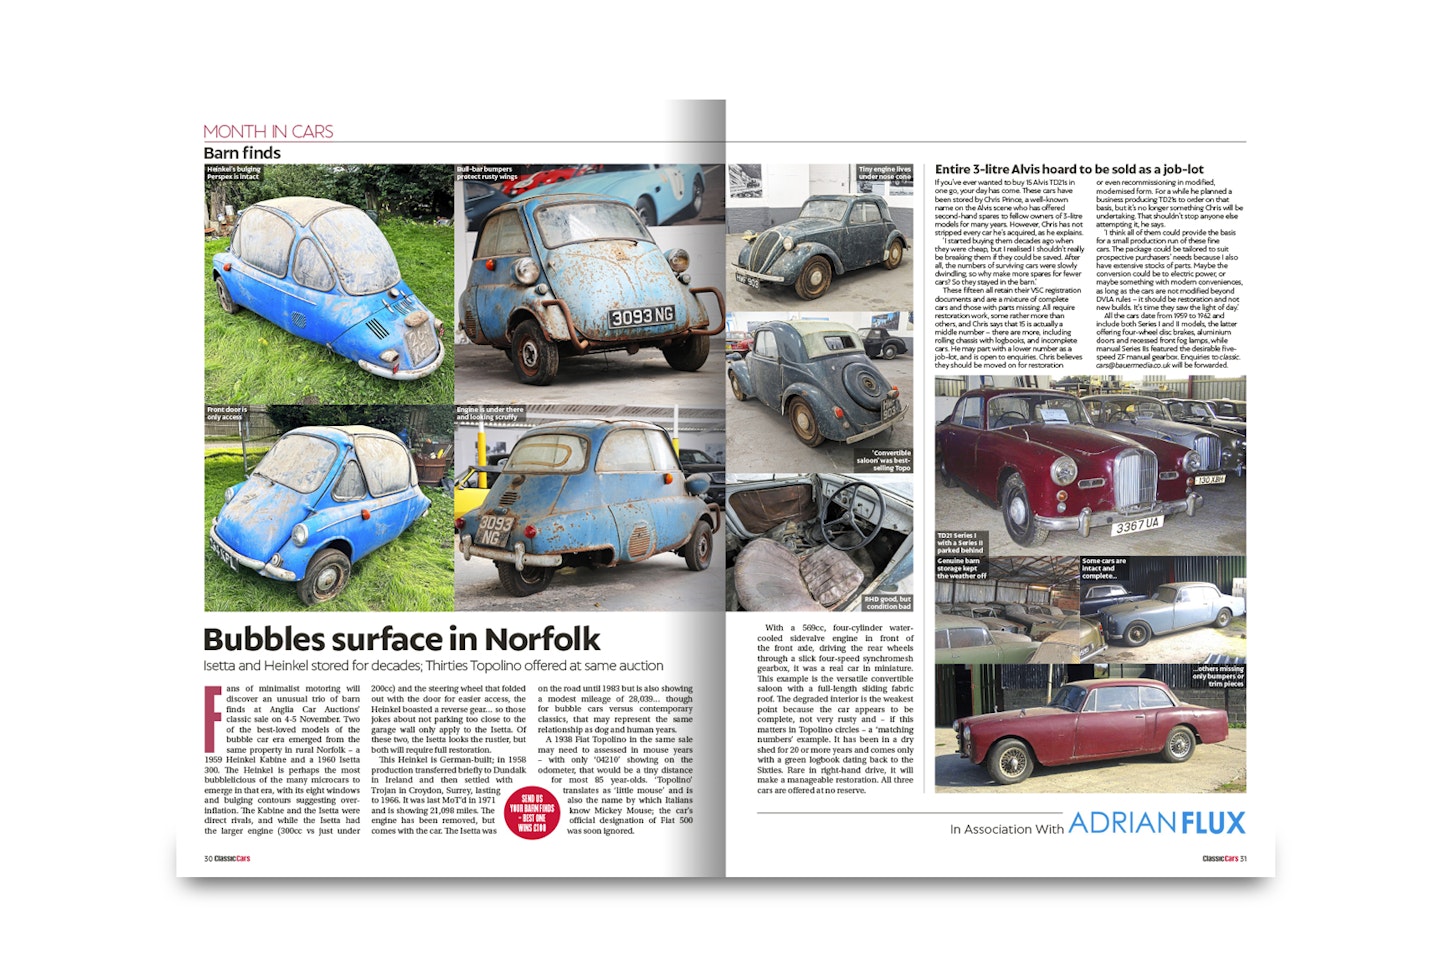 Barn Finds – Heinkel bubble-car stash and dishevelled Lotus unearthed in Norfolk